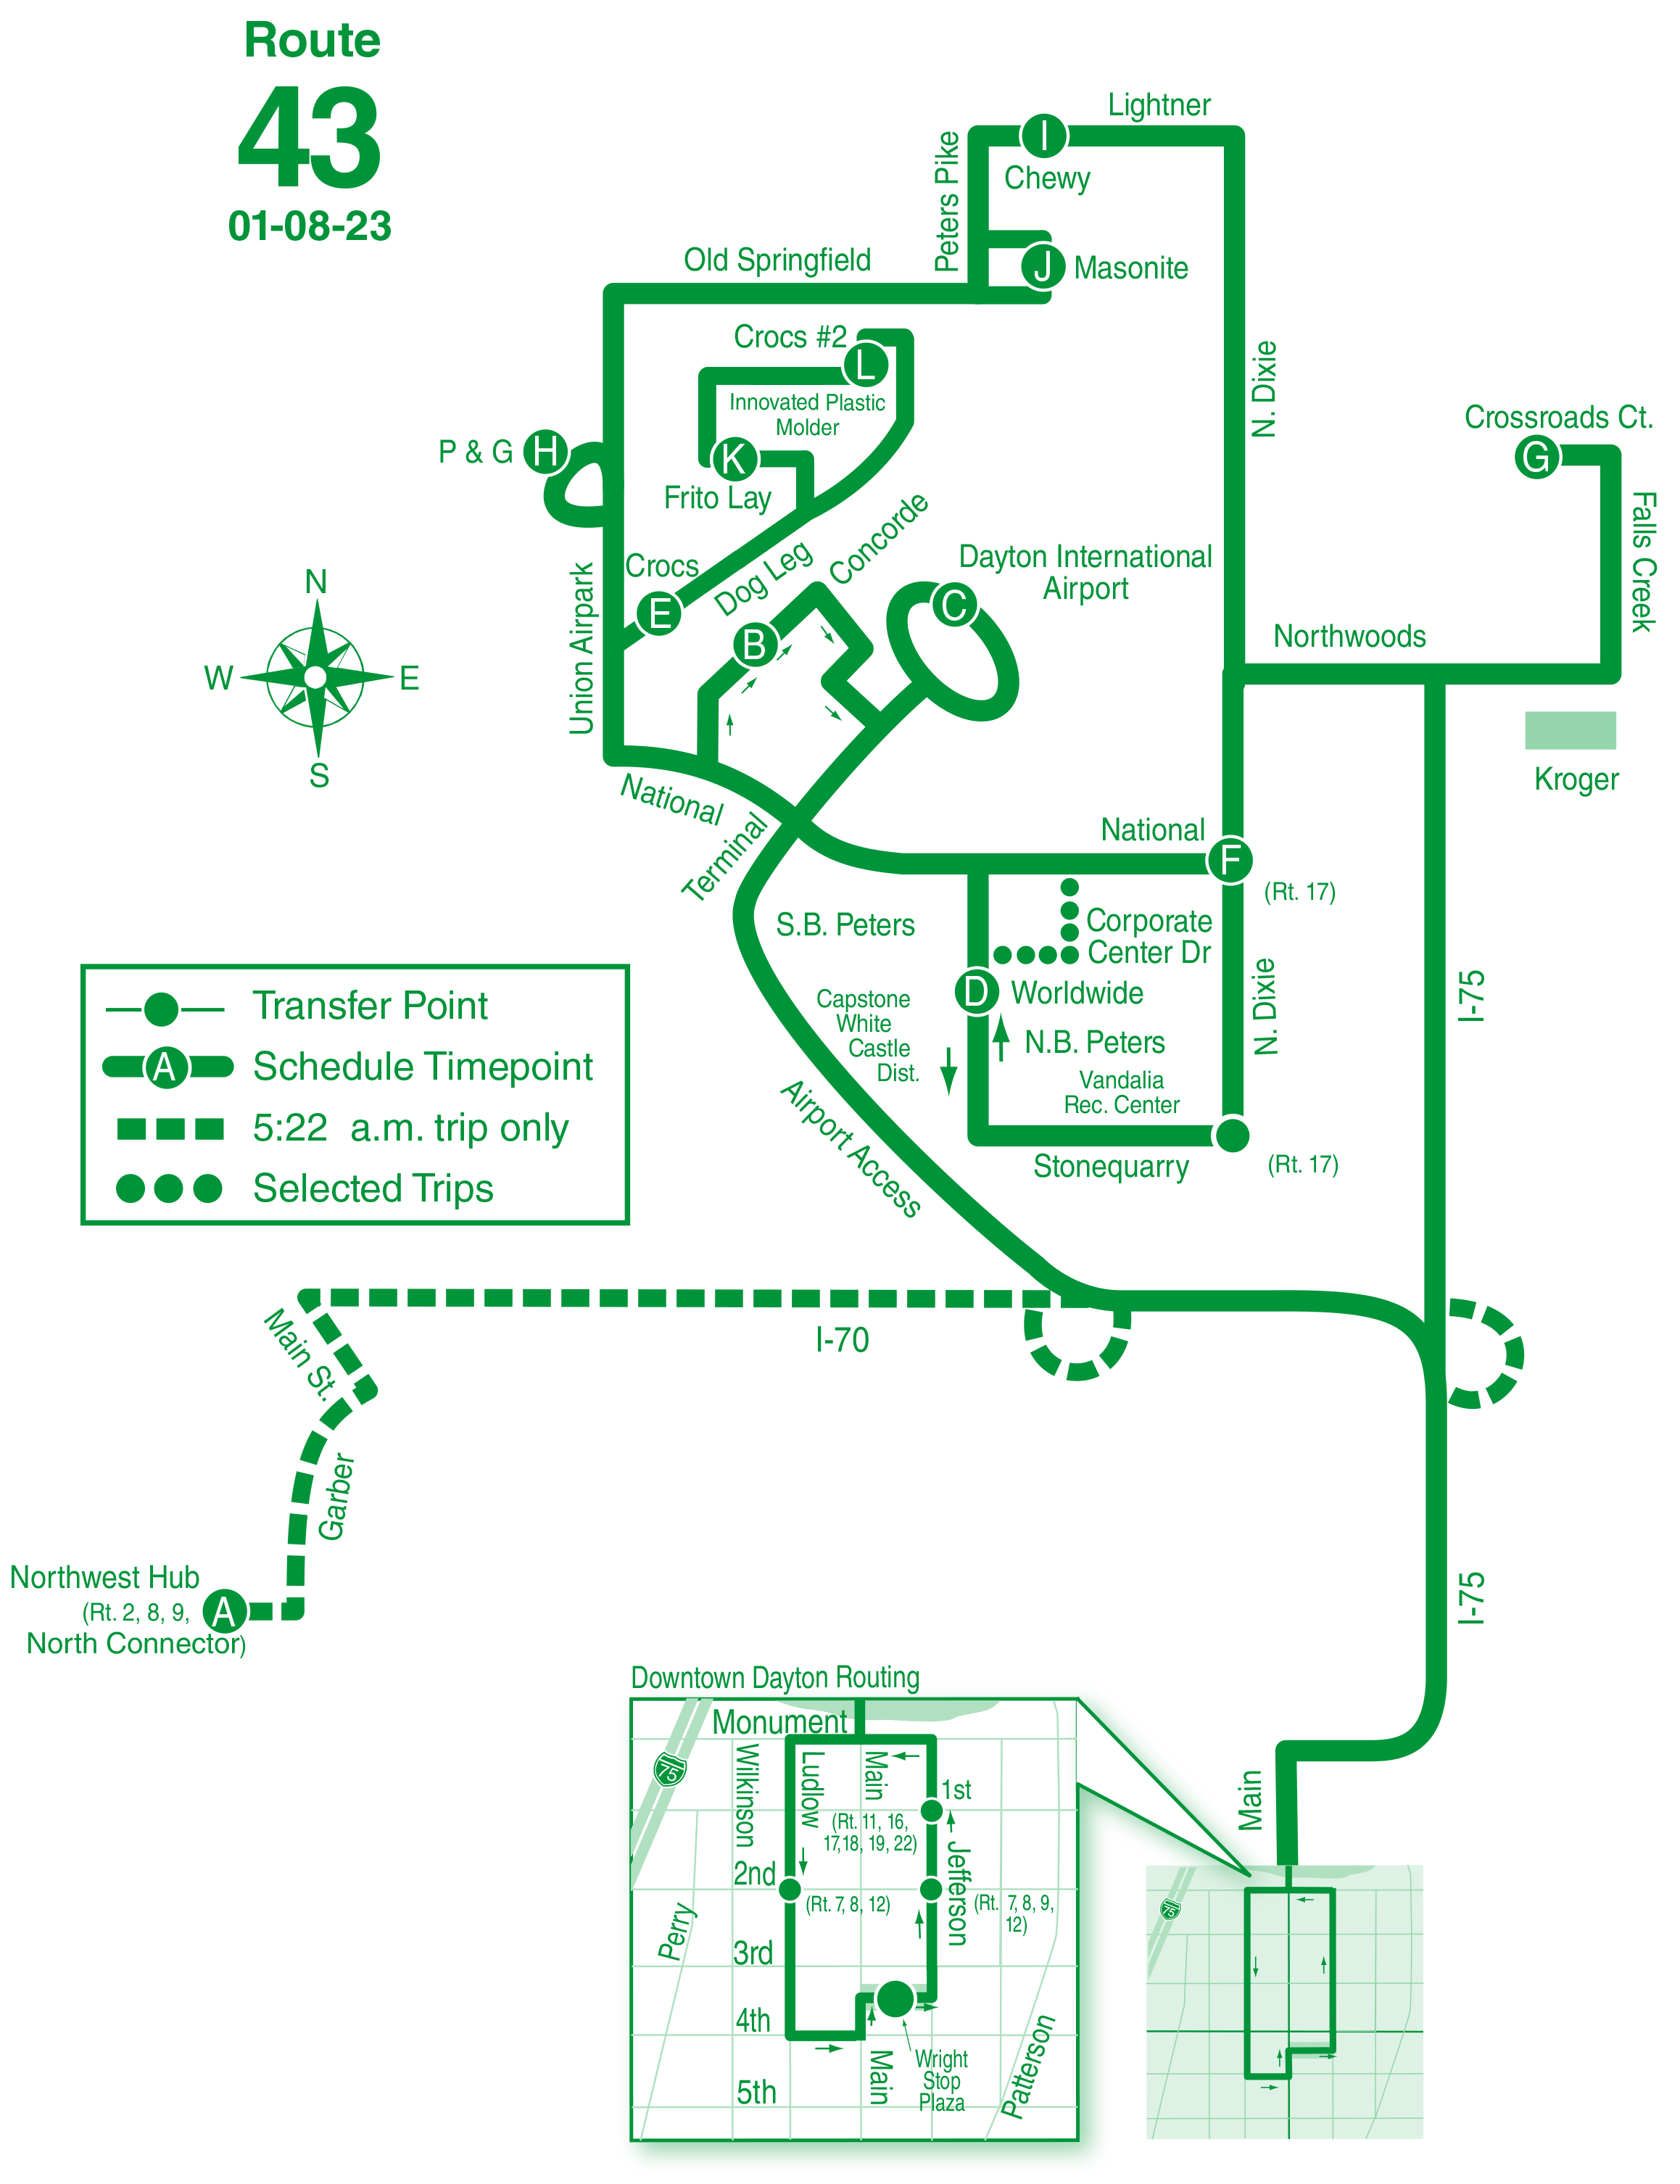 Route 43 map 01-08-23